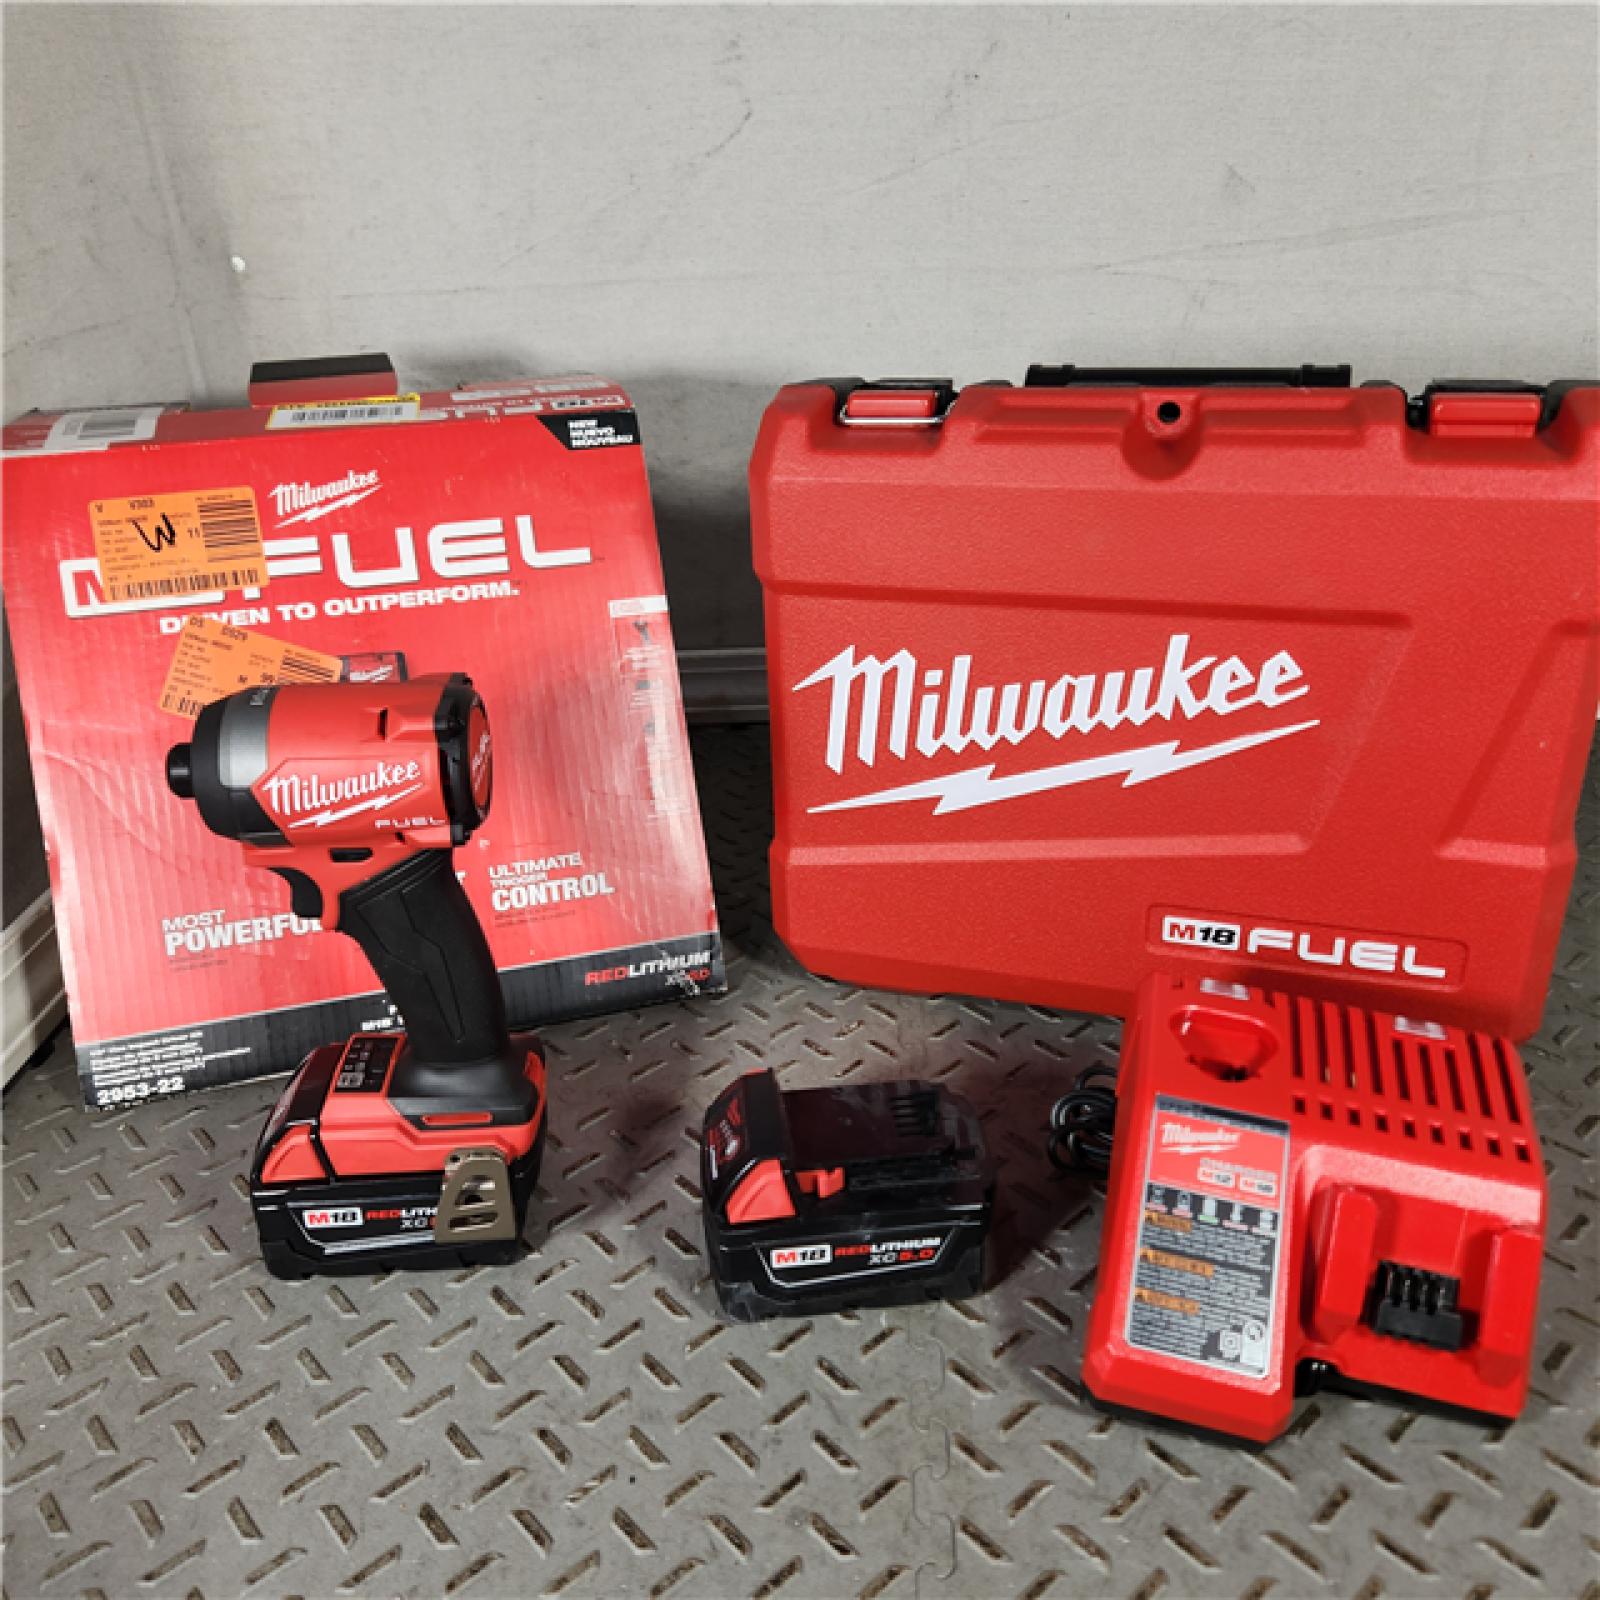 Houston location- AS-IS Milwaukee M18 FUEL 1/4 Hex Impact Driver Kit Appears in new condition